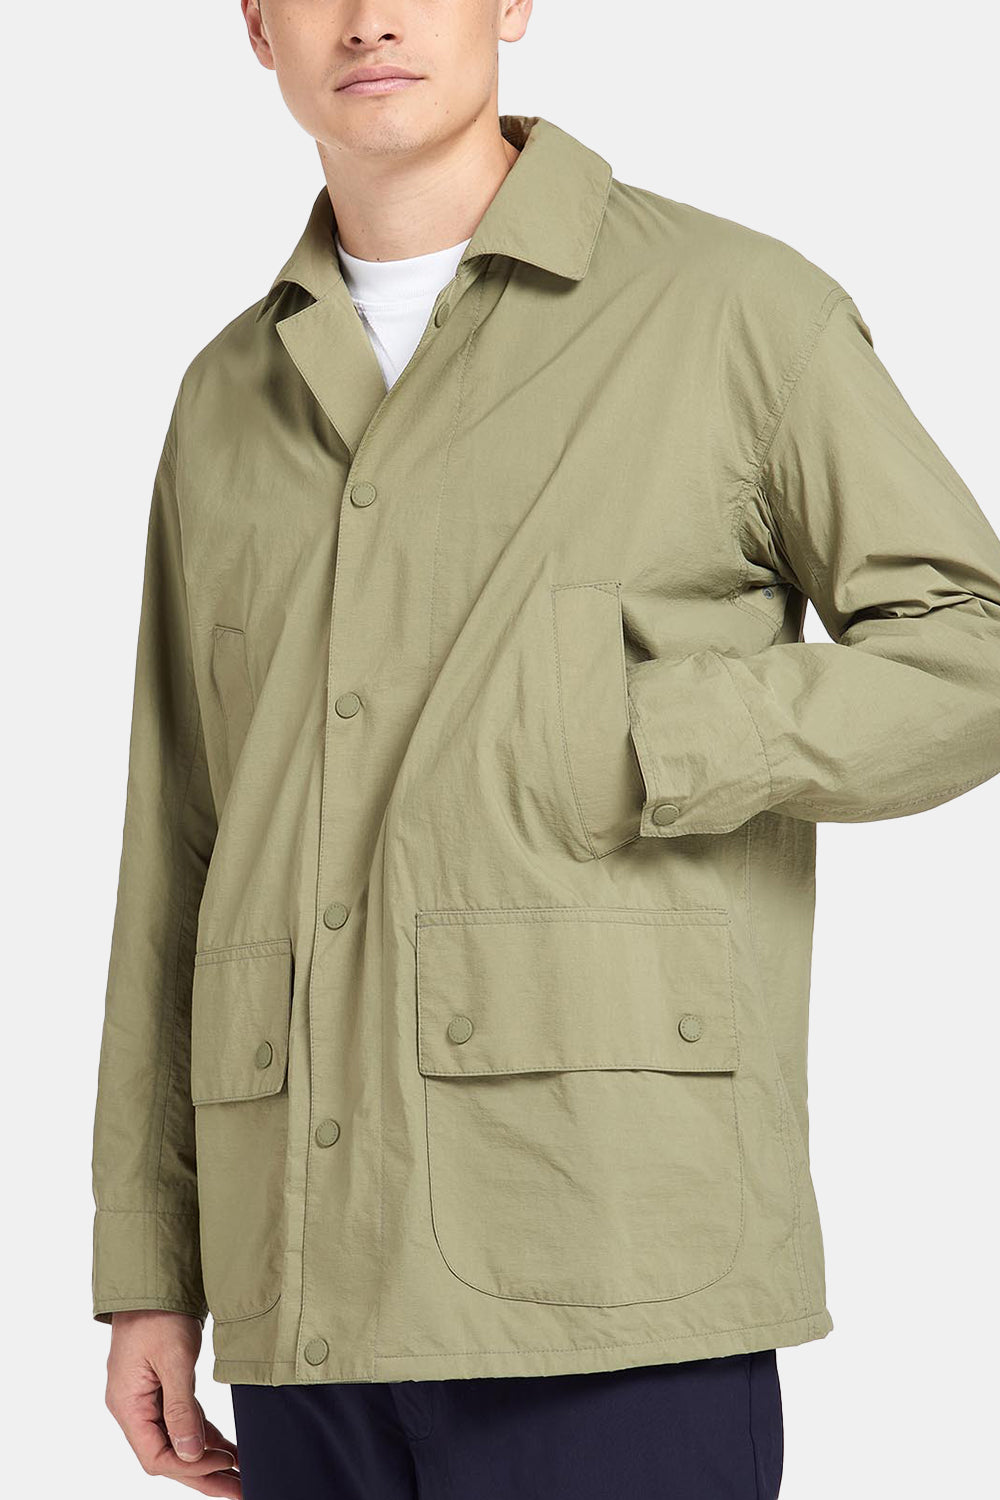 Barbour White Label Kyoto Casual (Bleached Olive) | Number Six